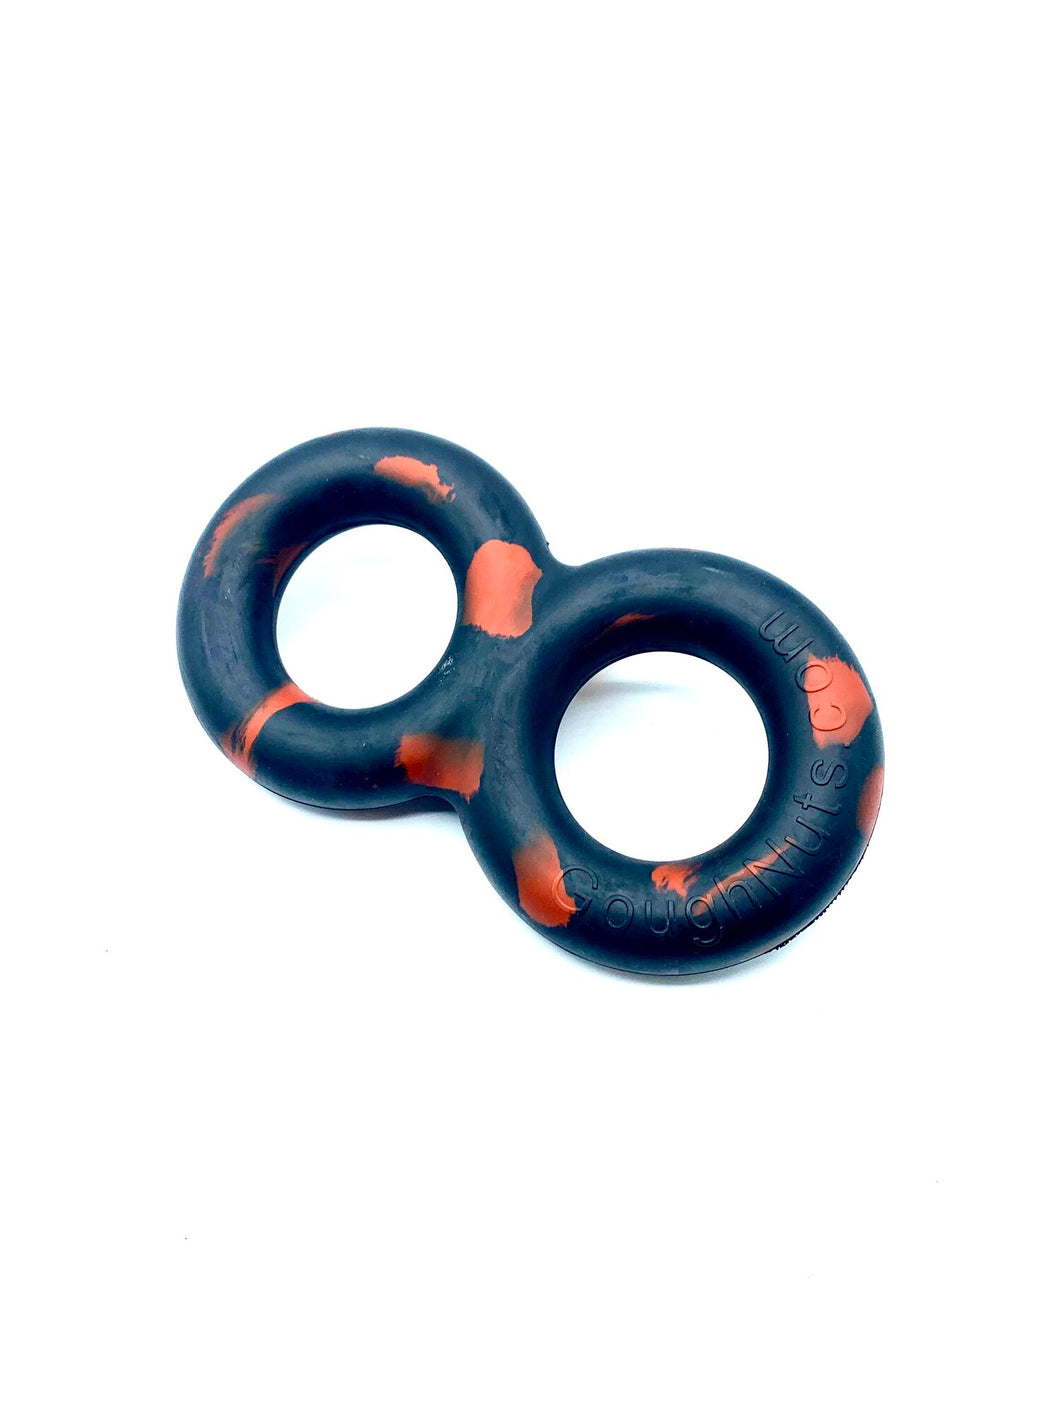 Goughnuts — Original Black Tug Dog Toys for Large Dogs / Pull Toy for Large Breeds